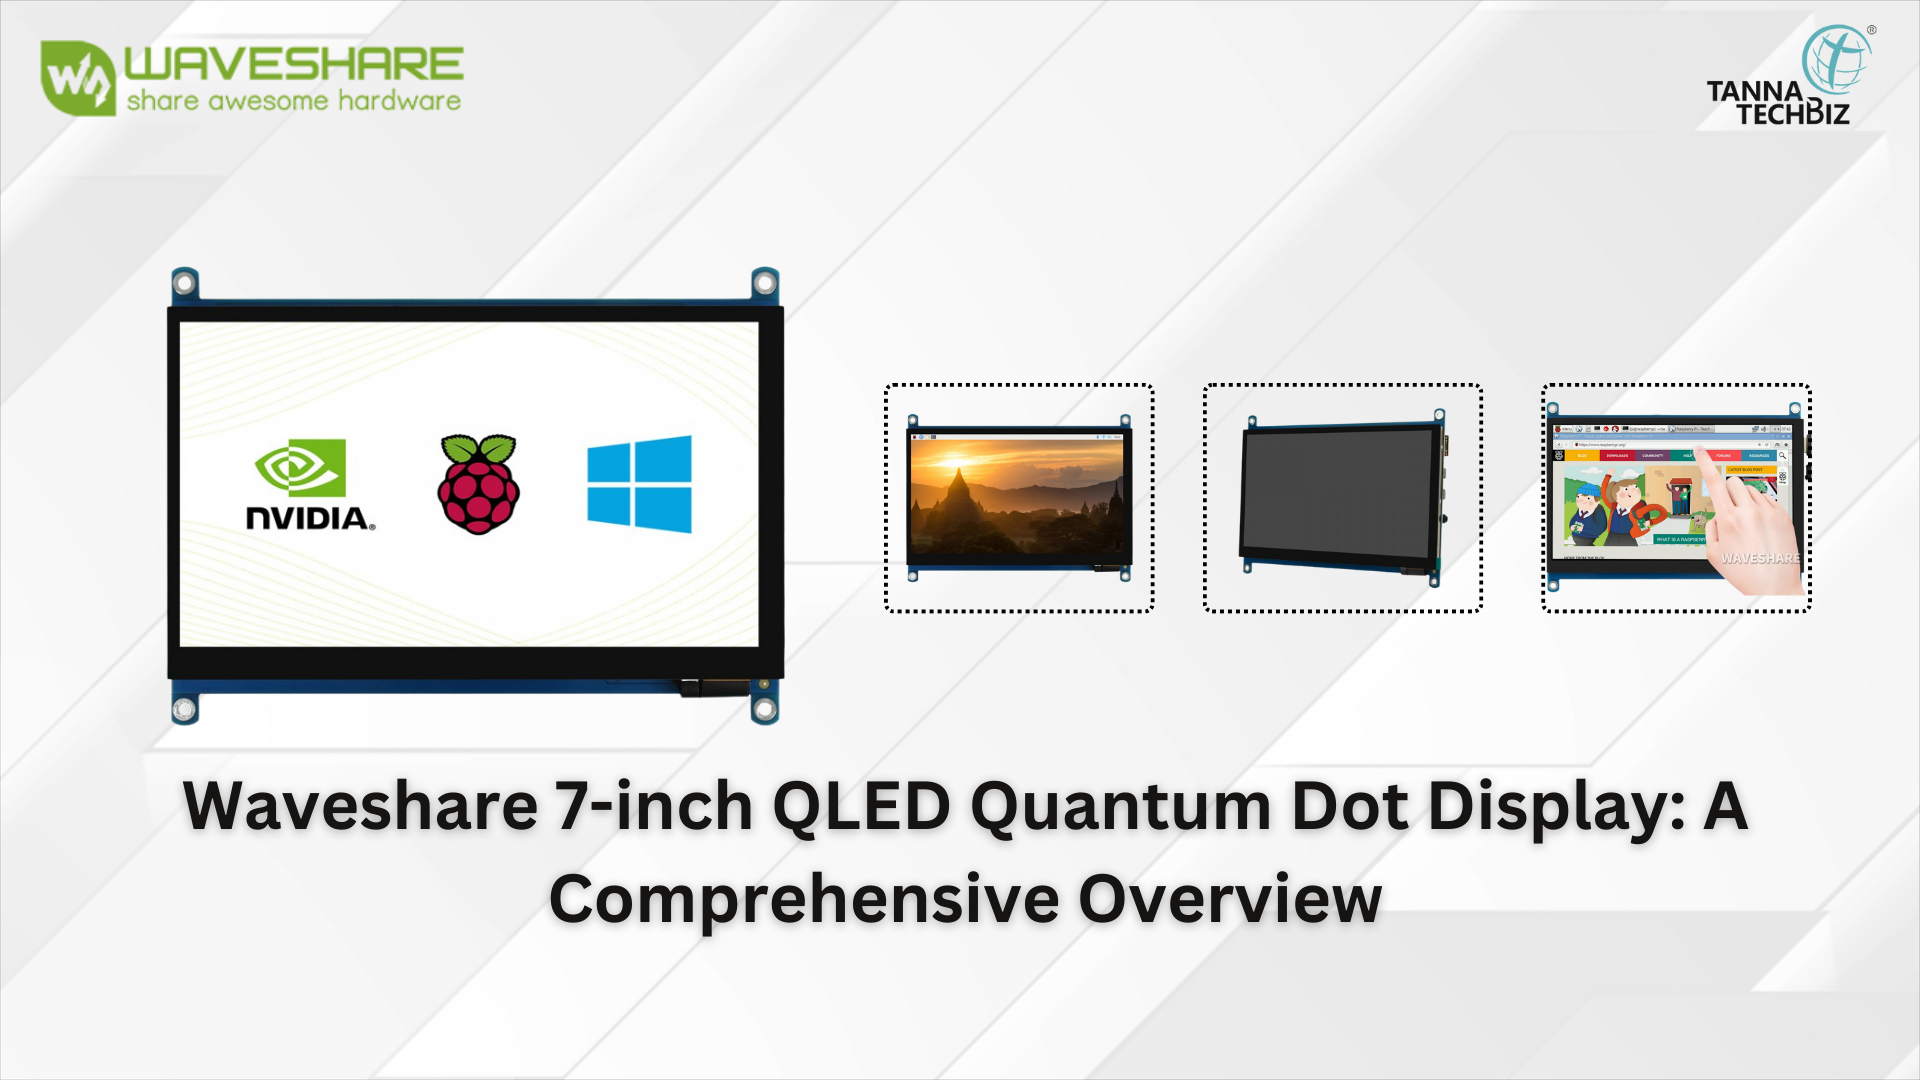 Waveshare 7-inch QLED Quantum Dot Display: A Comprehensive Overview